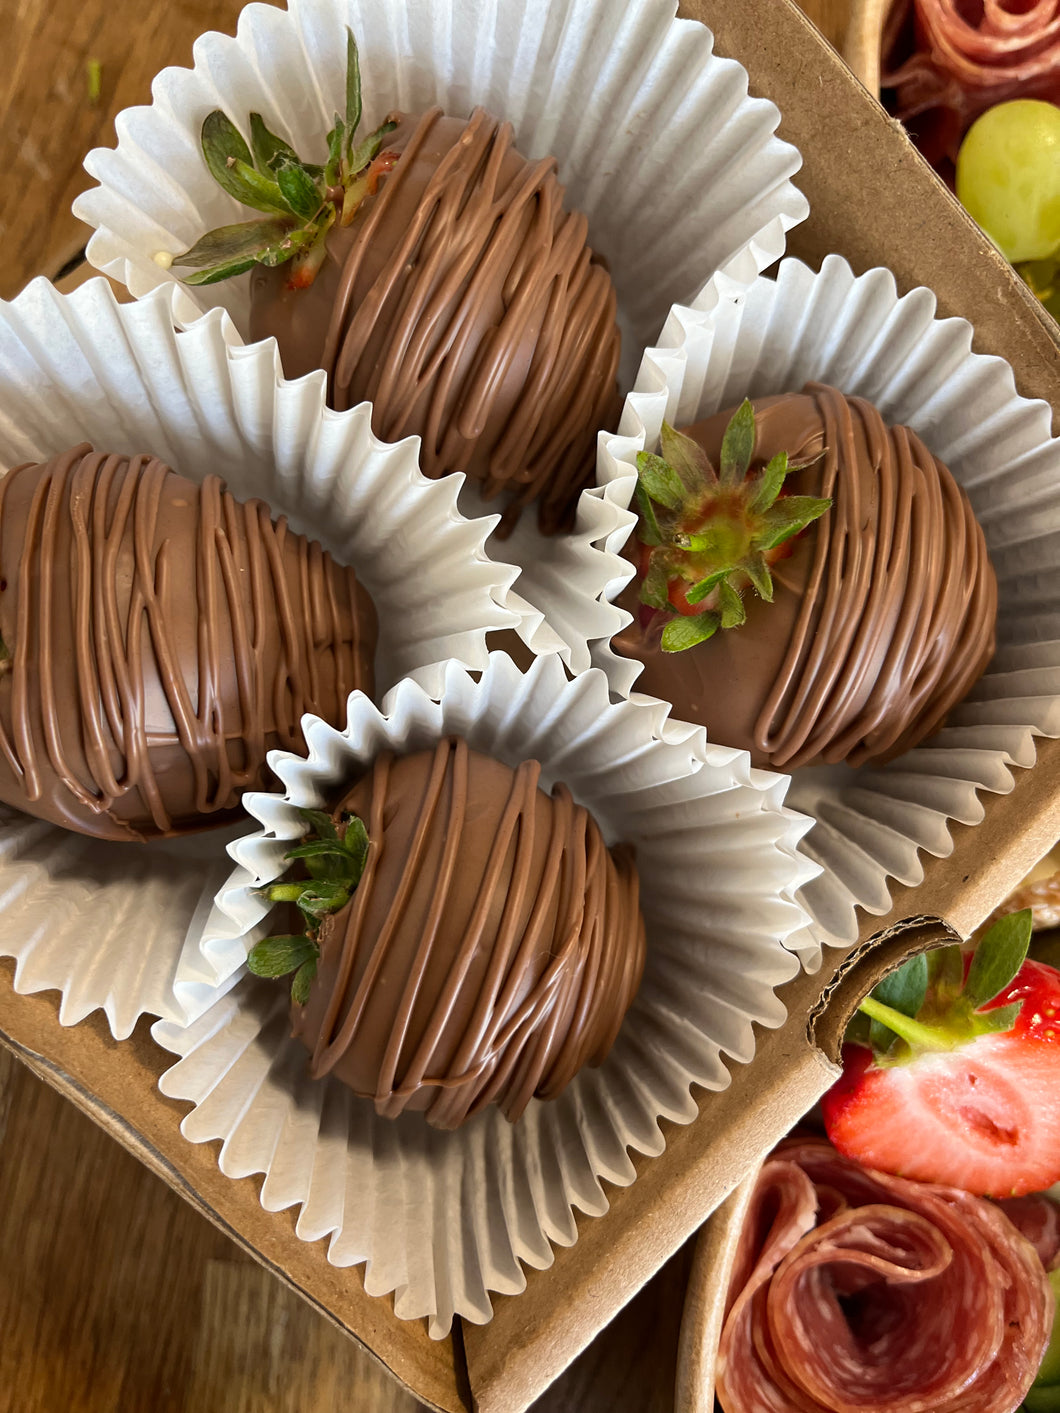 Gifts for under £5 - Box of 4 Chocolate Strawberries